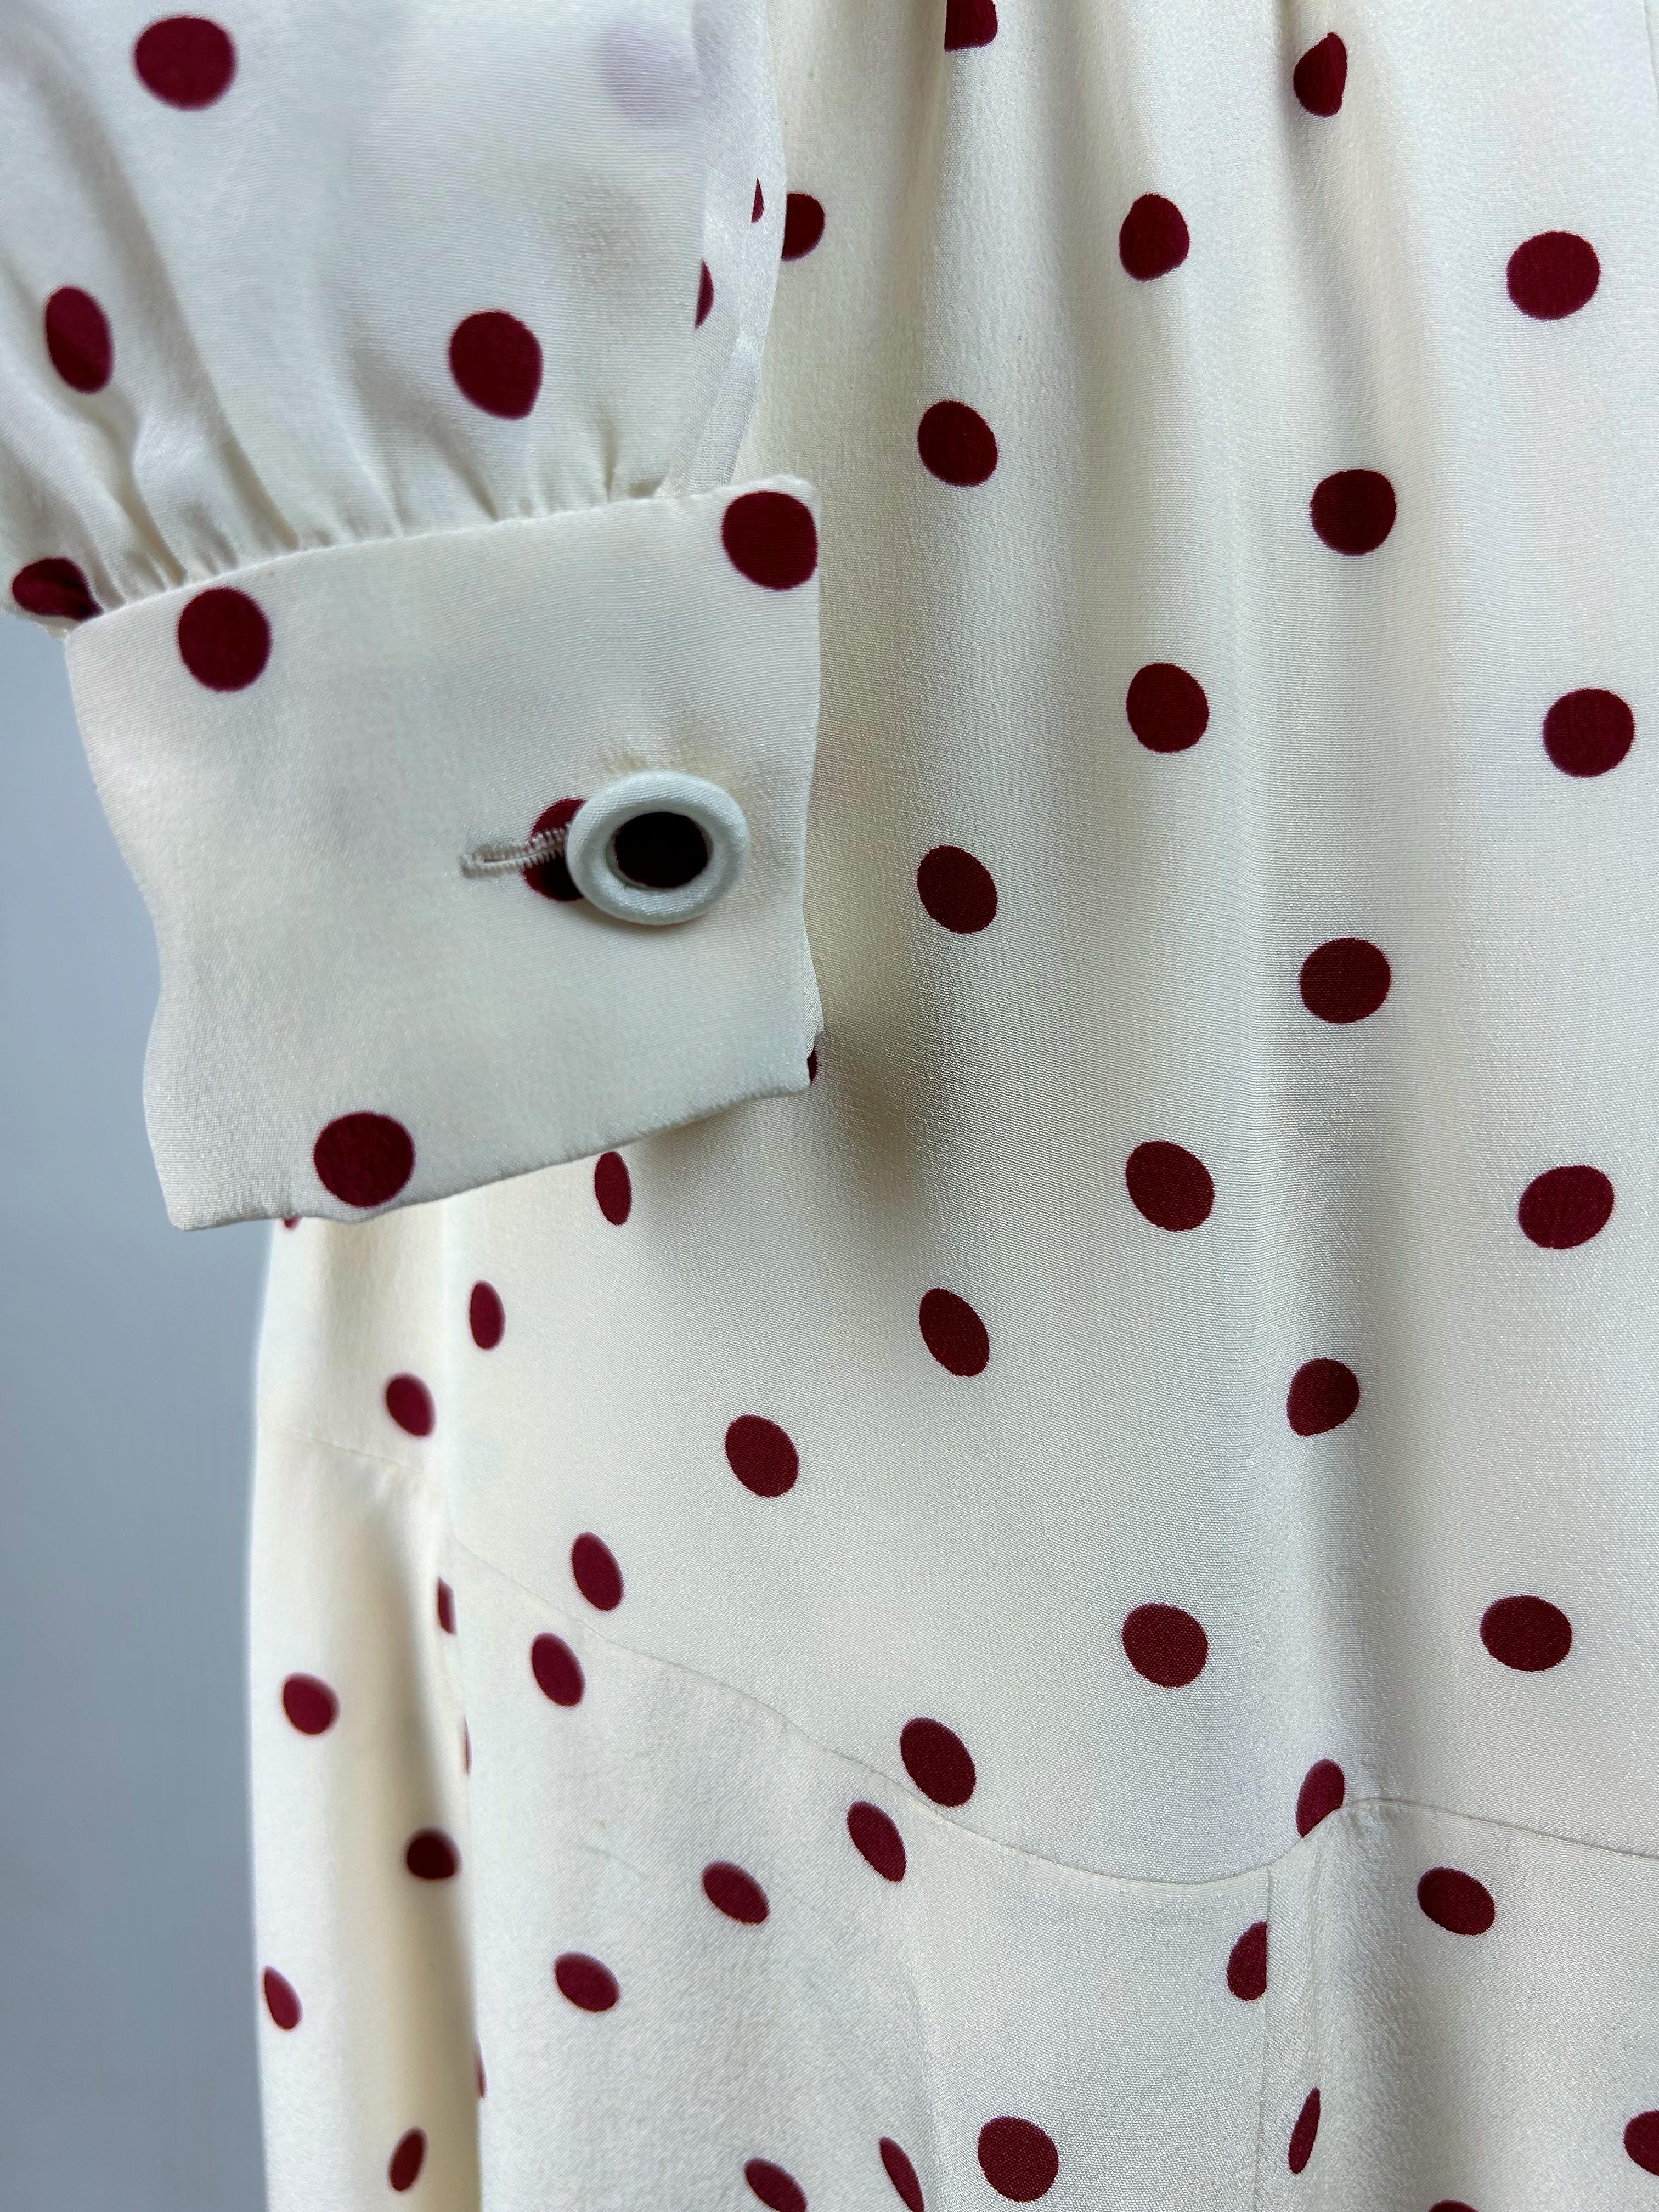 A Polka Dots crepe cocktail dress by Chanel Haute Couture numbered 59644 C. 1975 For Sale 9